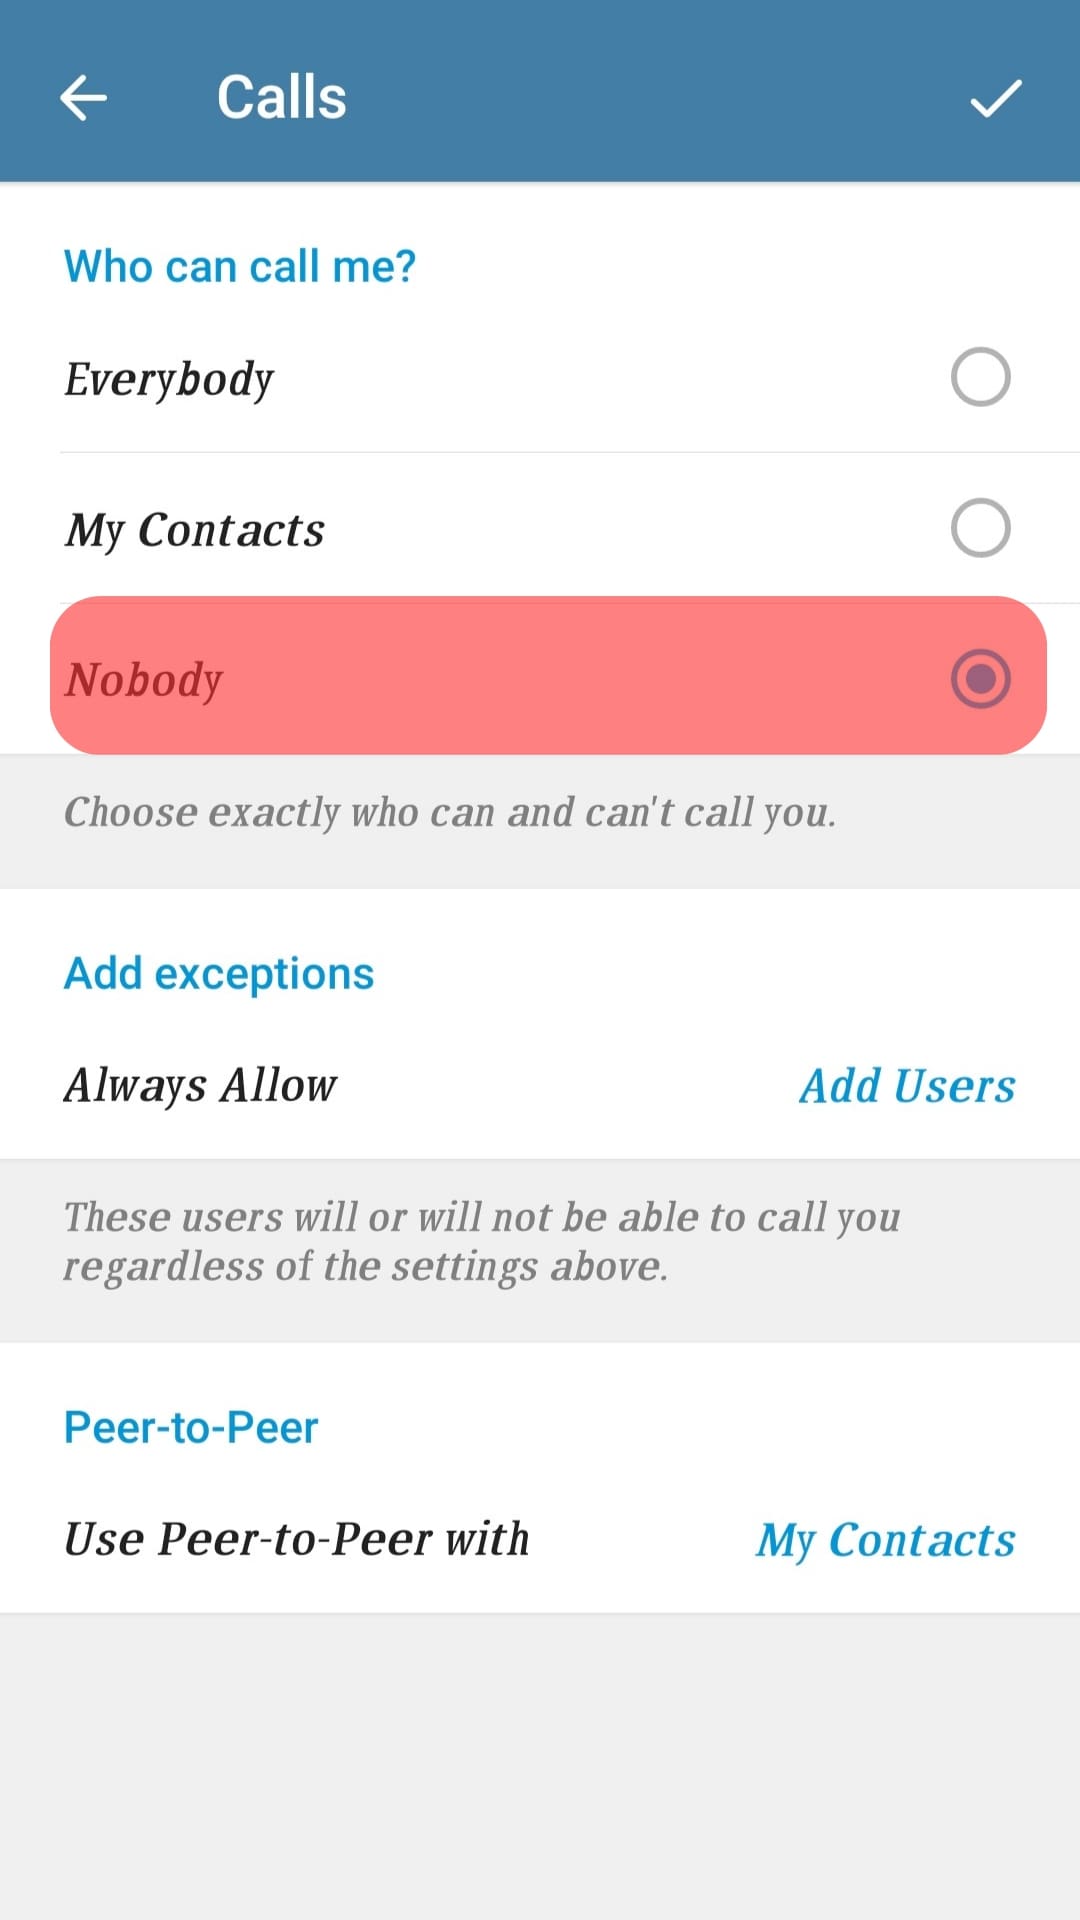 Select ‘Nobody’ Under The ‘Who Can Call Me’ Option.